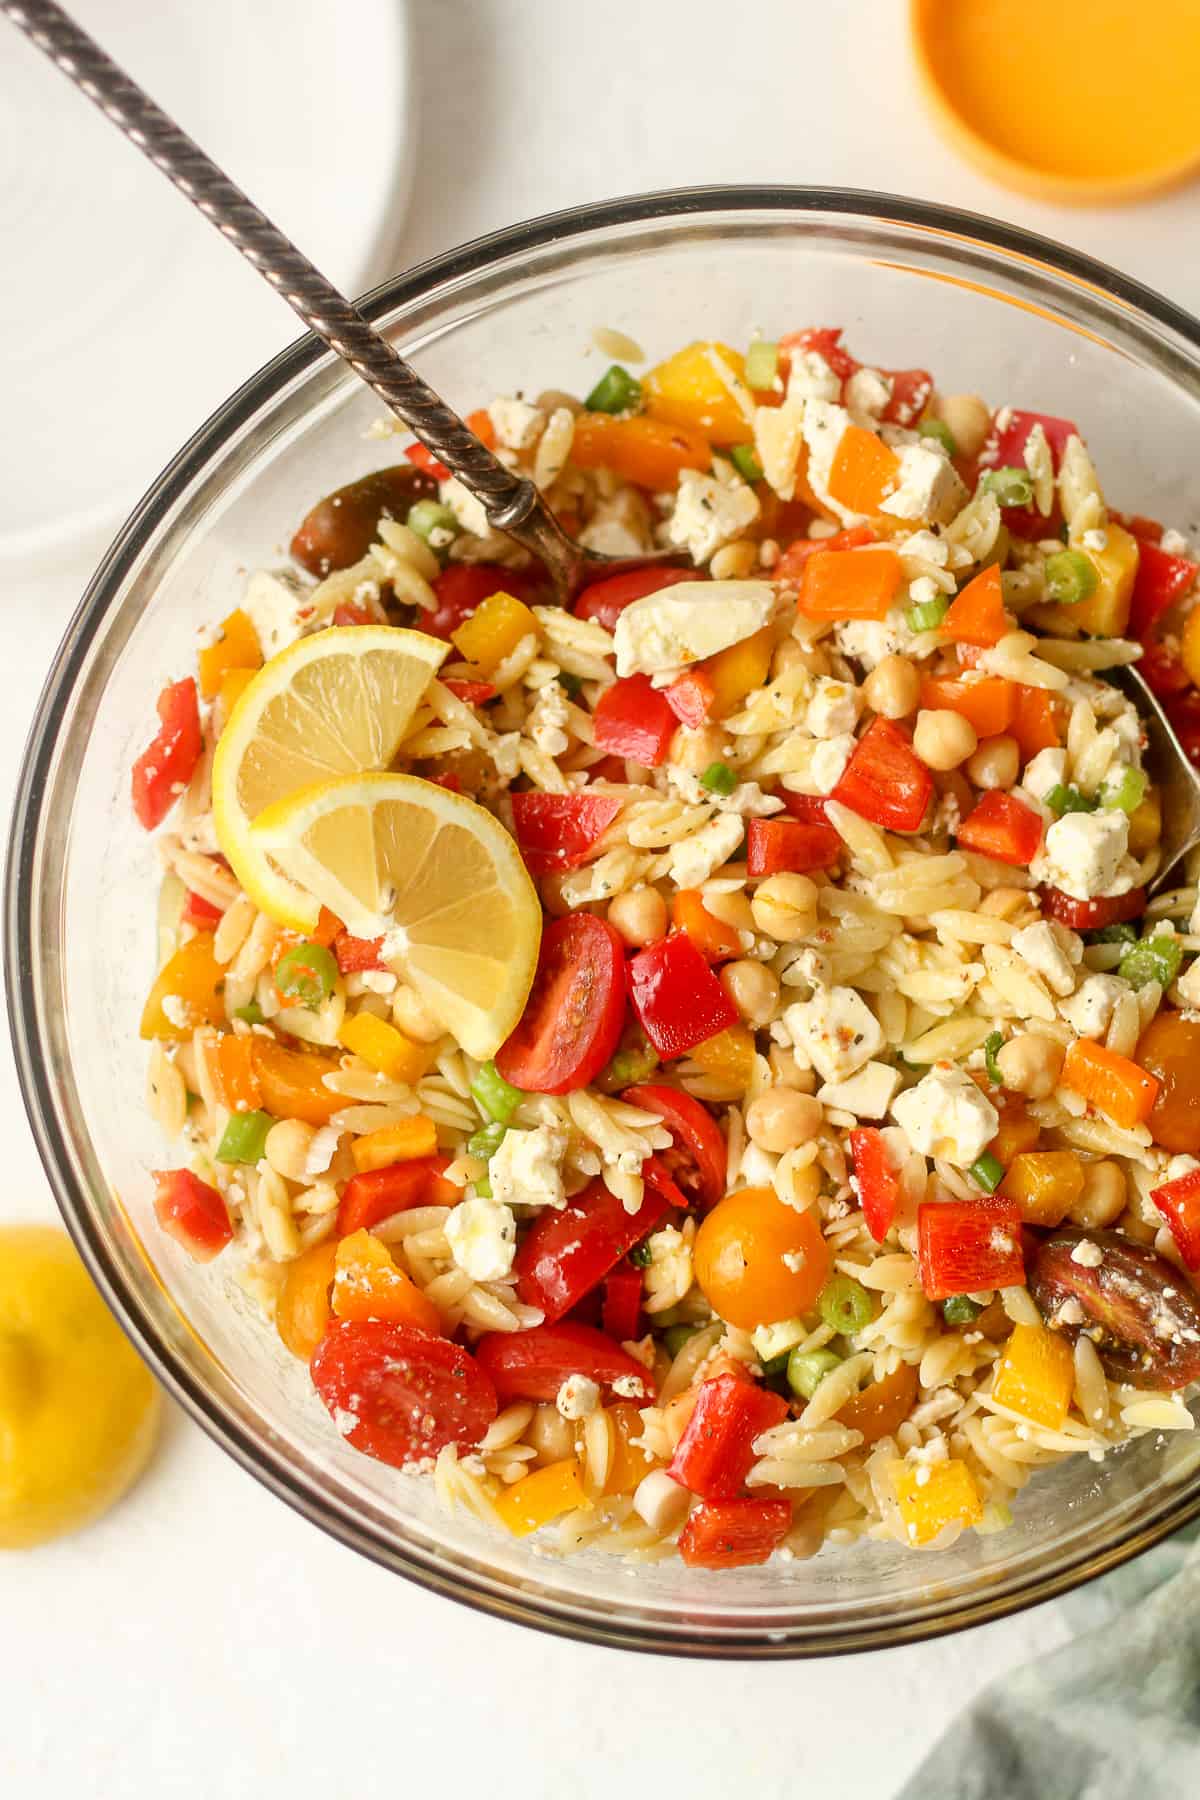 A large bowl of orzo pasta salad with lemon dressing.